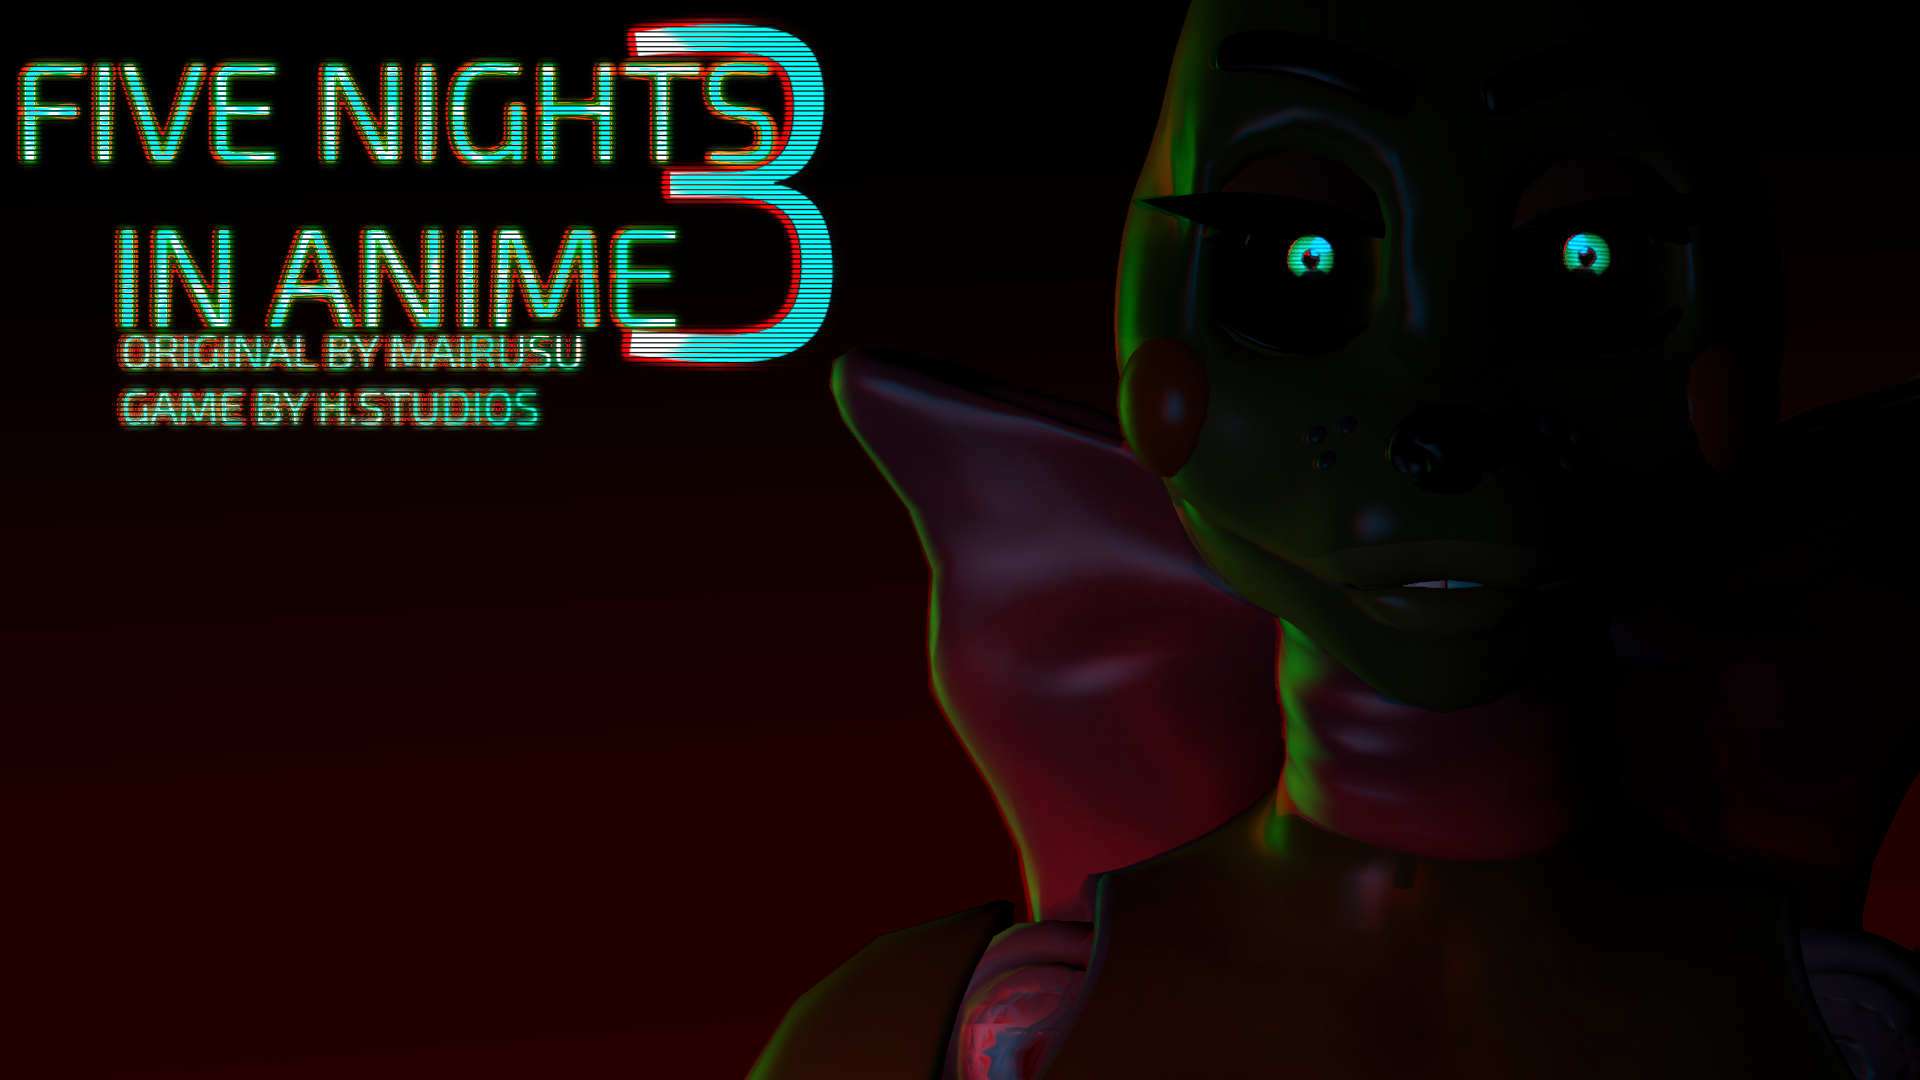 Five Nights In Anime Game Play Free Online - Mobile Legends